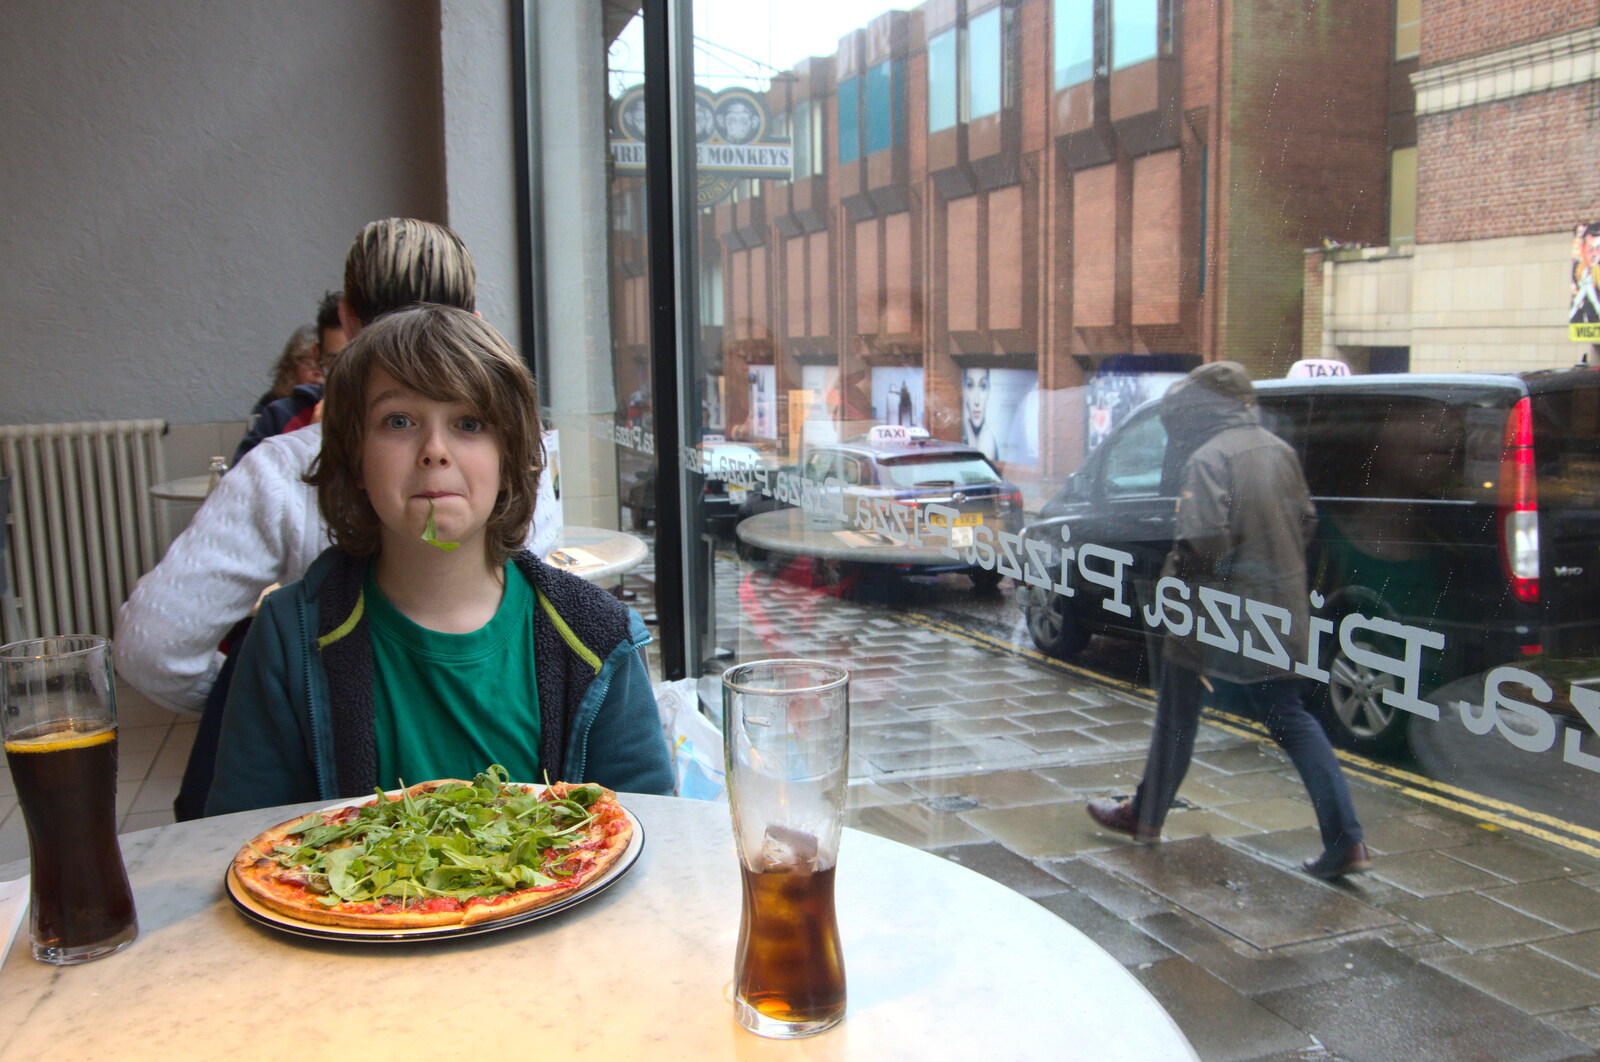 Fred's got a bit of rocket in Pizza Express from Fred's Flute Exam, Ipswich, Suffolk - 5th March 2020